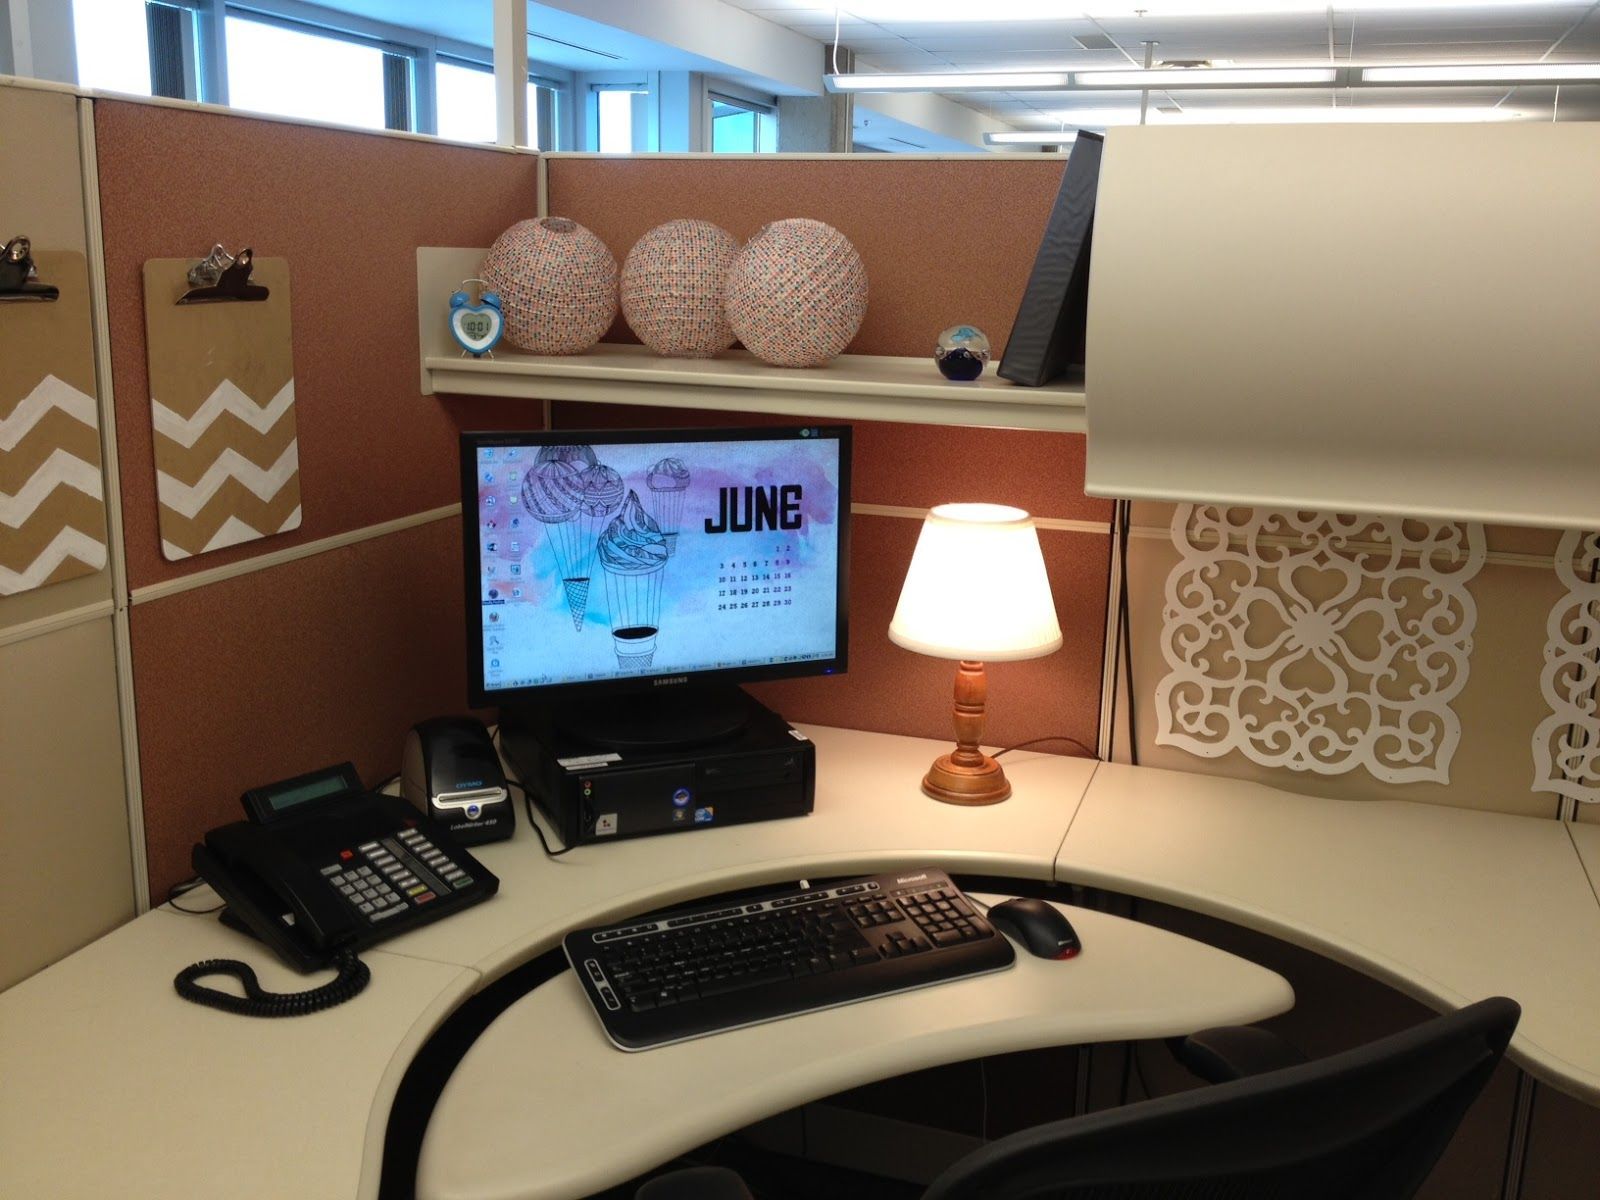 20 Cubicle Decor Ideas For Your Workspace - DIY for Offices